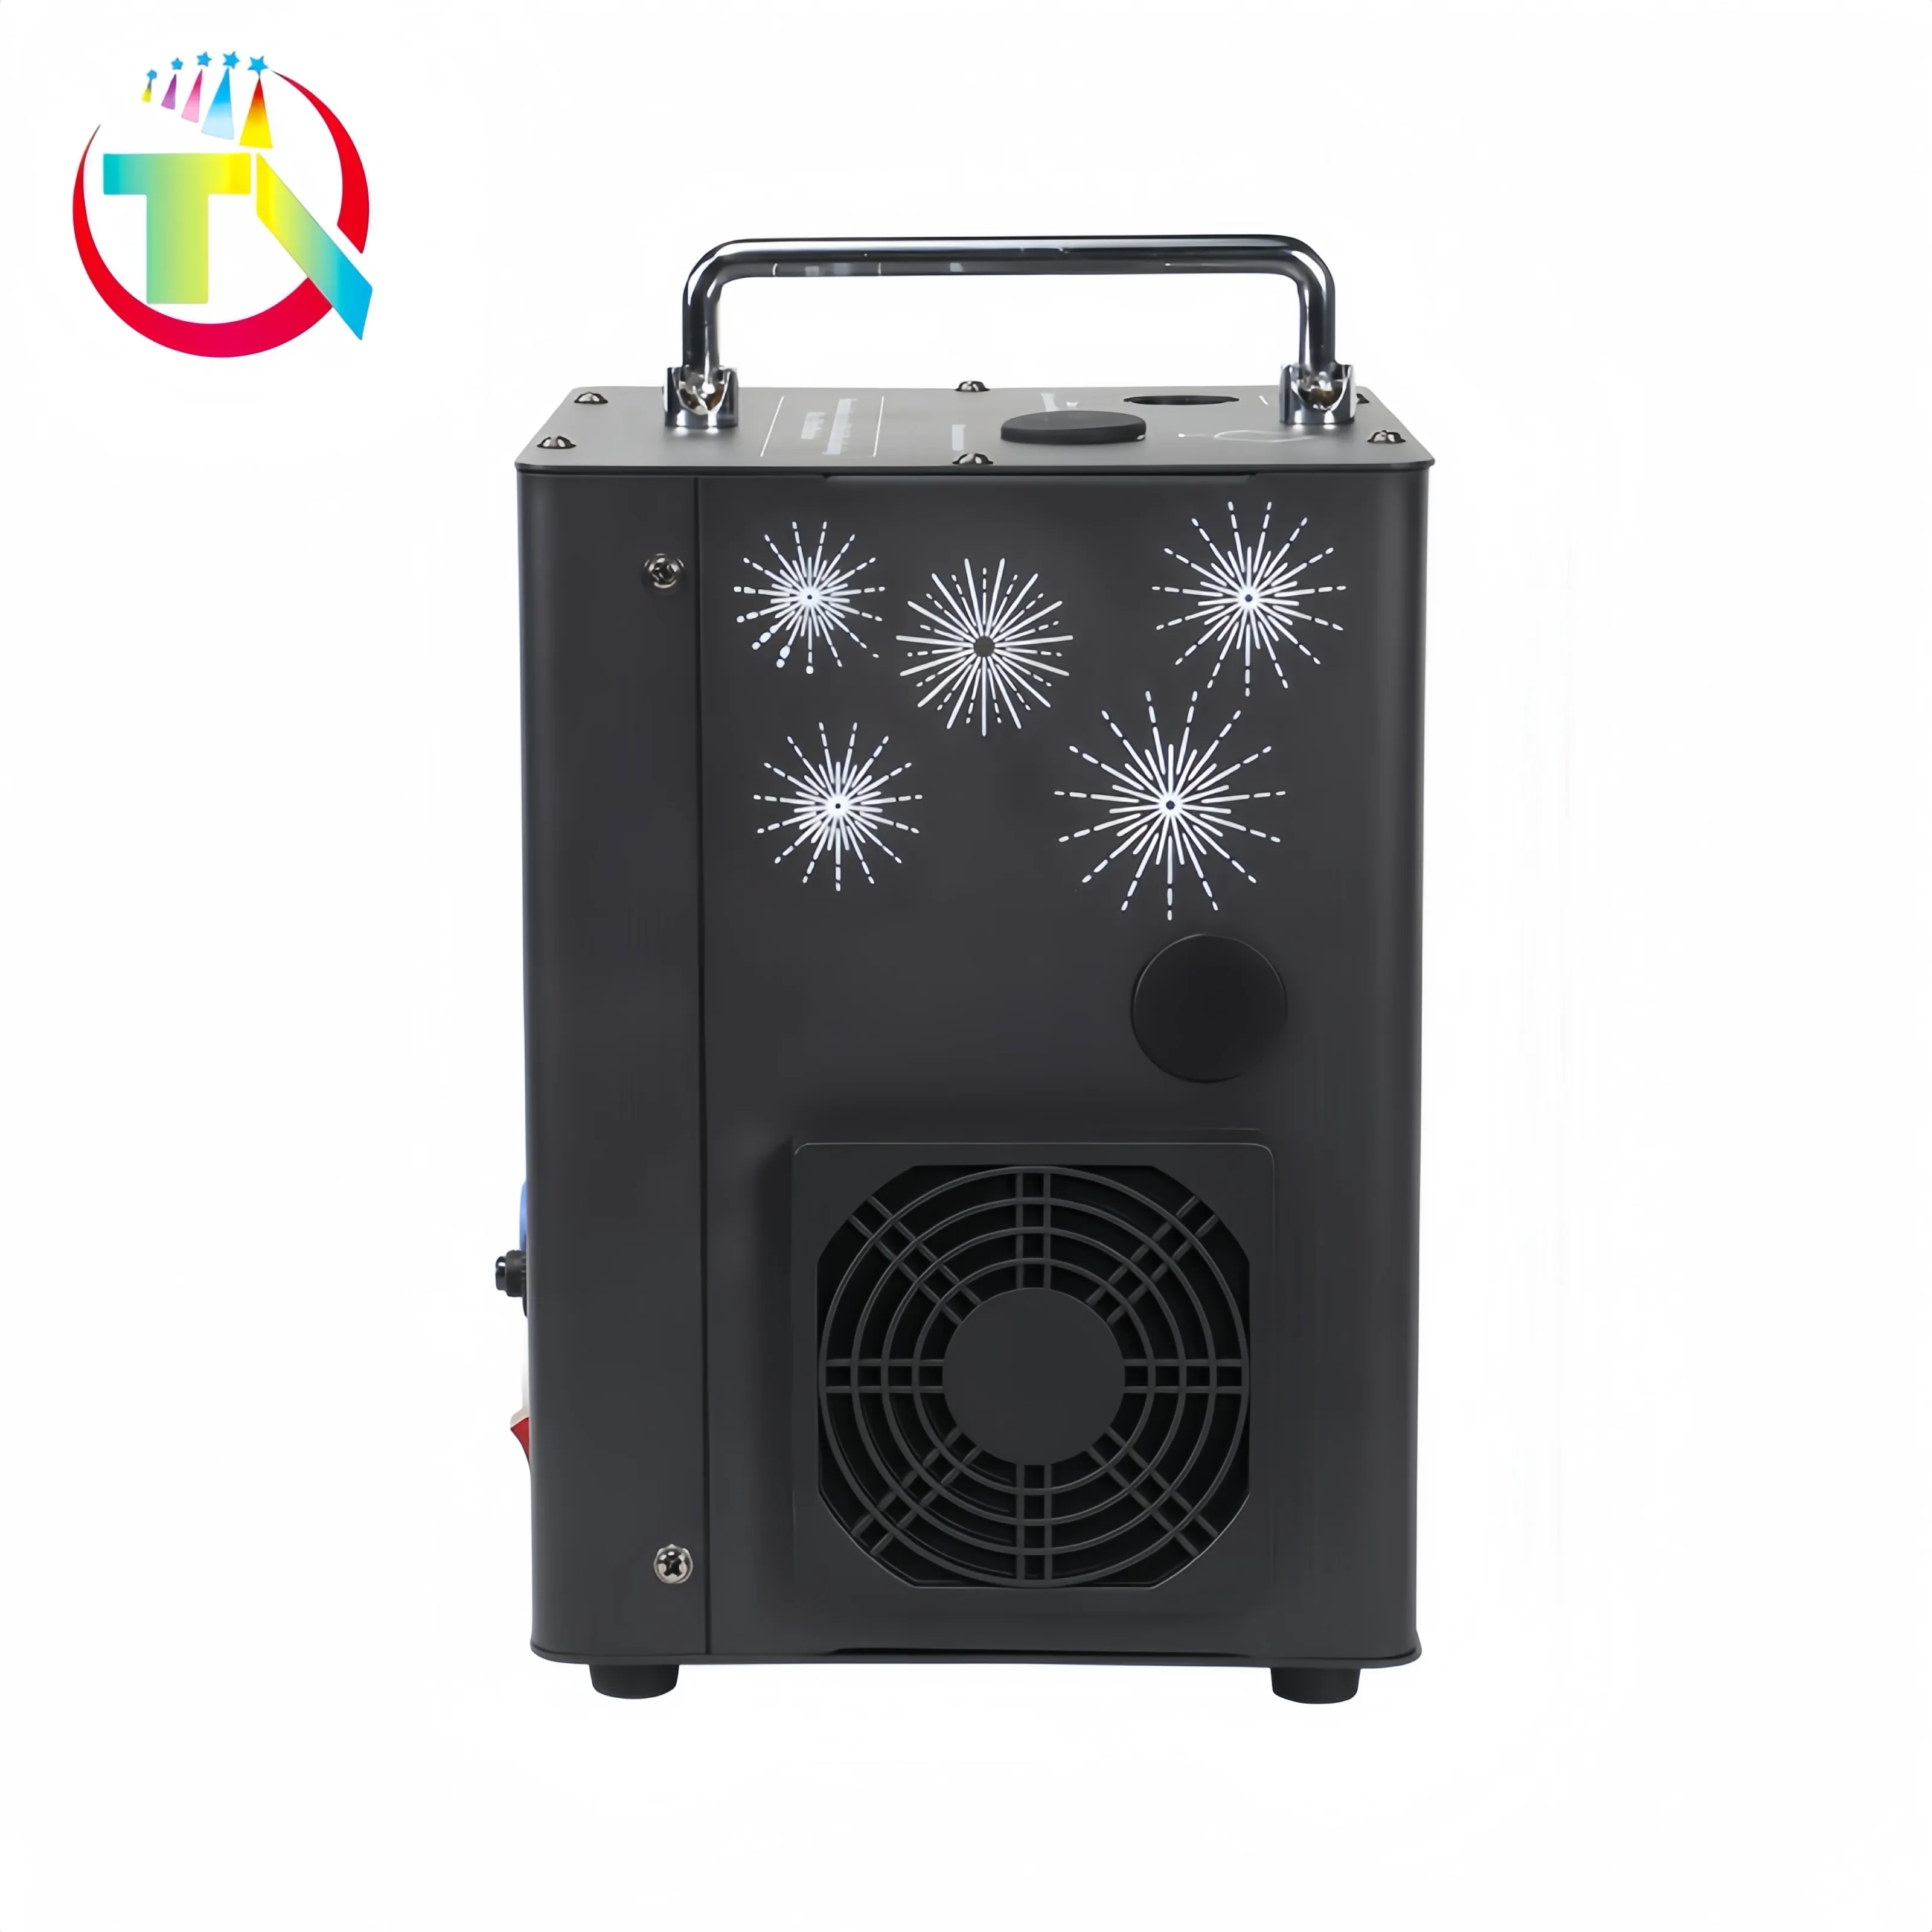 750W Portable Flower Spray Machine for All Occasions Enhances Firework Party Atmosphere Sta Lighting Equipment